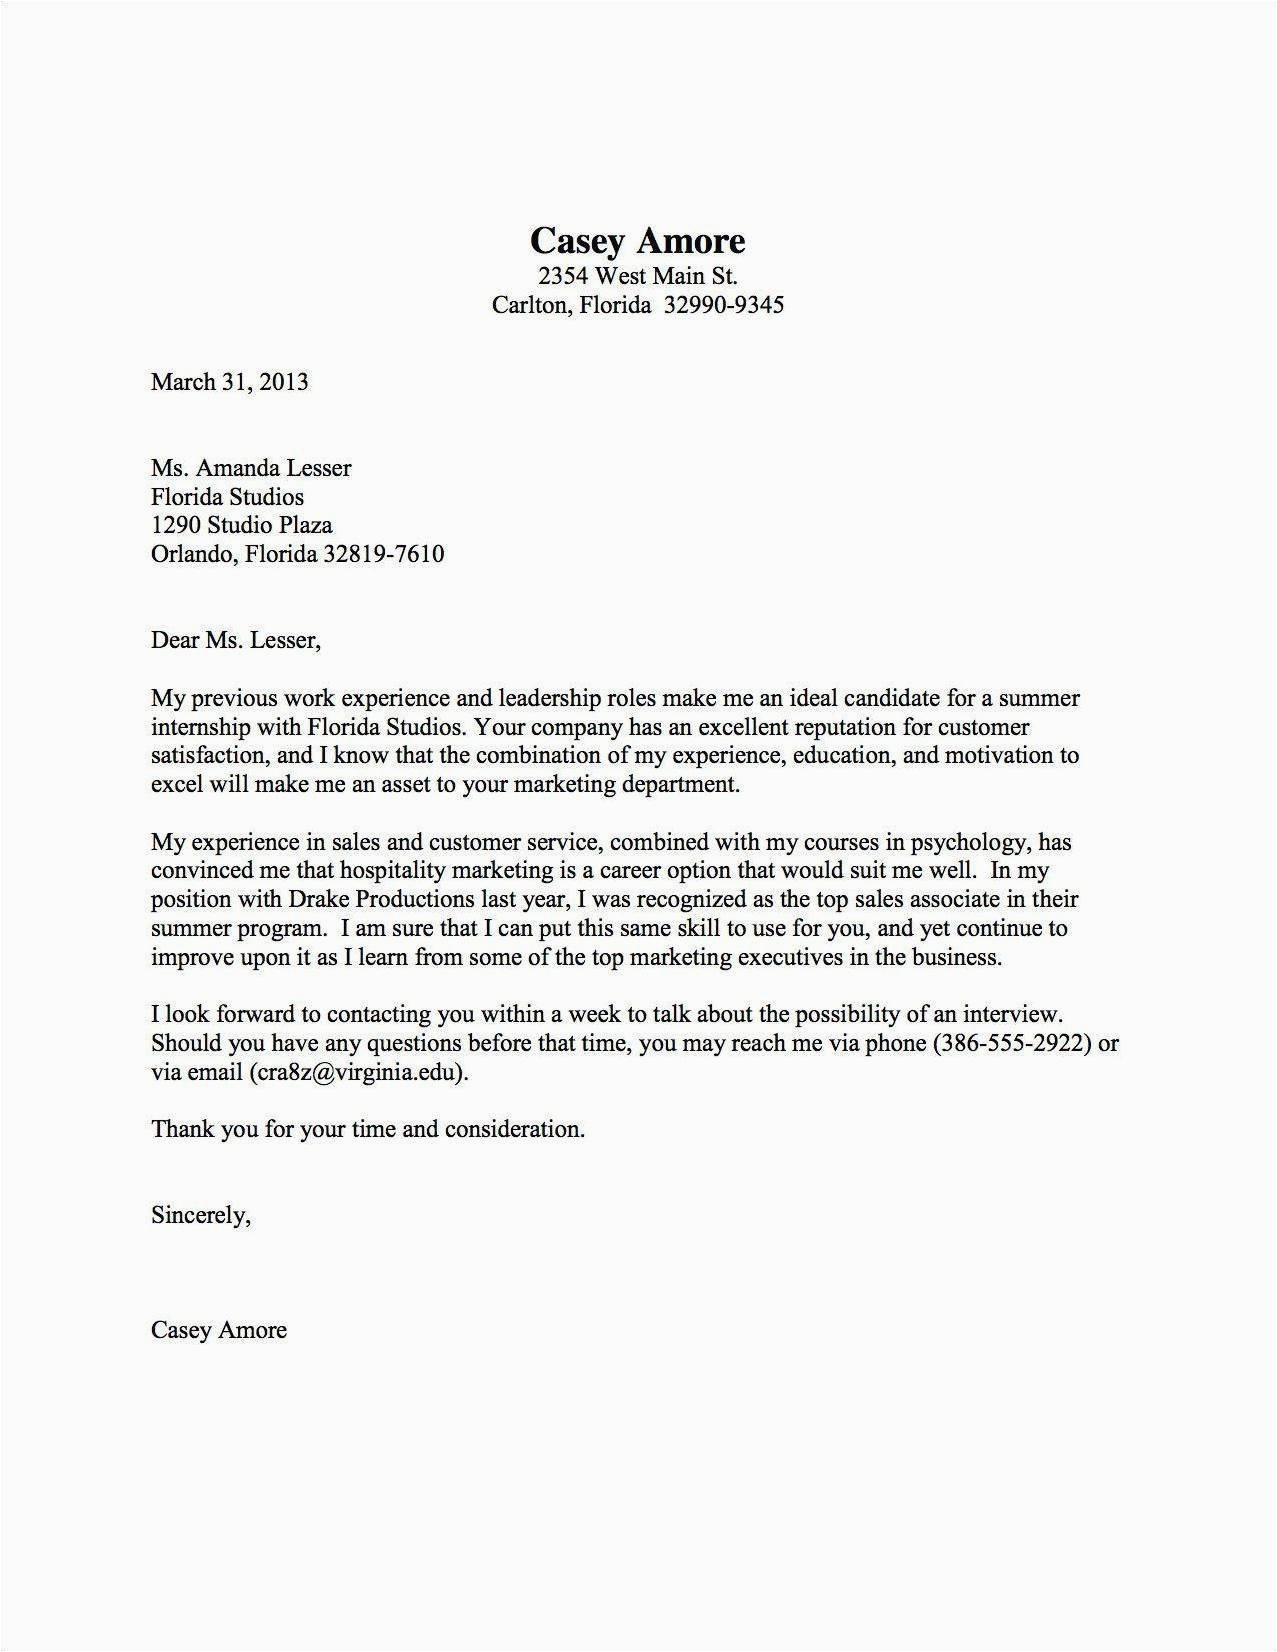 Need Sample Of Cover Letter for Resume Whatever Else You Have In Your Cover Letter Be Certain to Request An